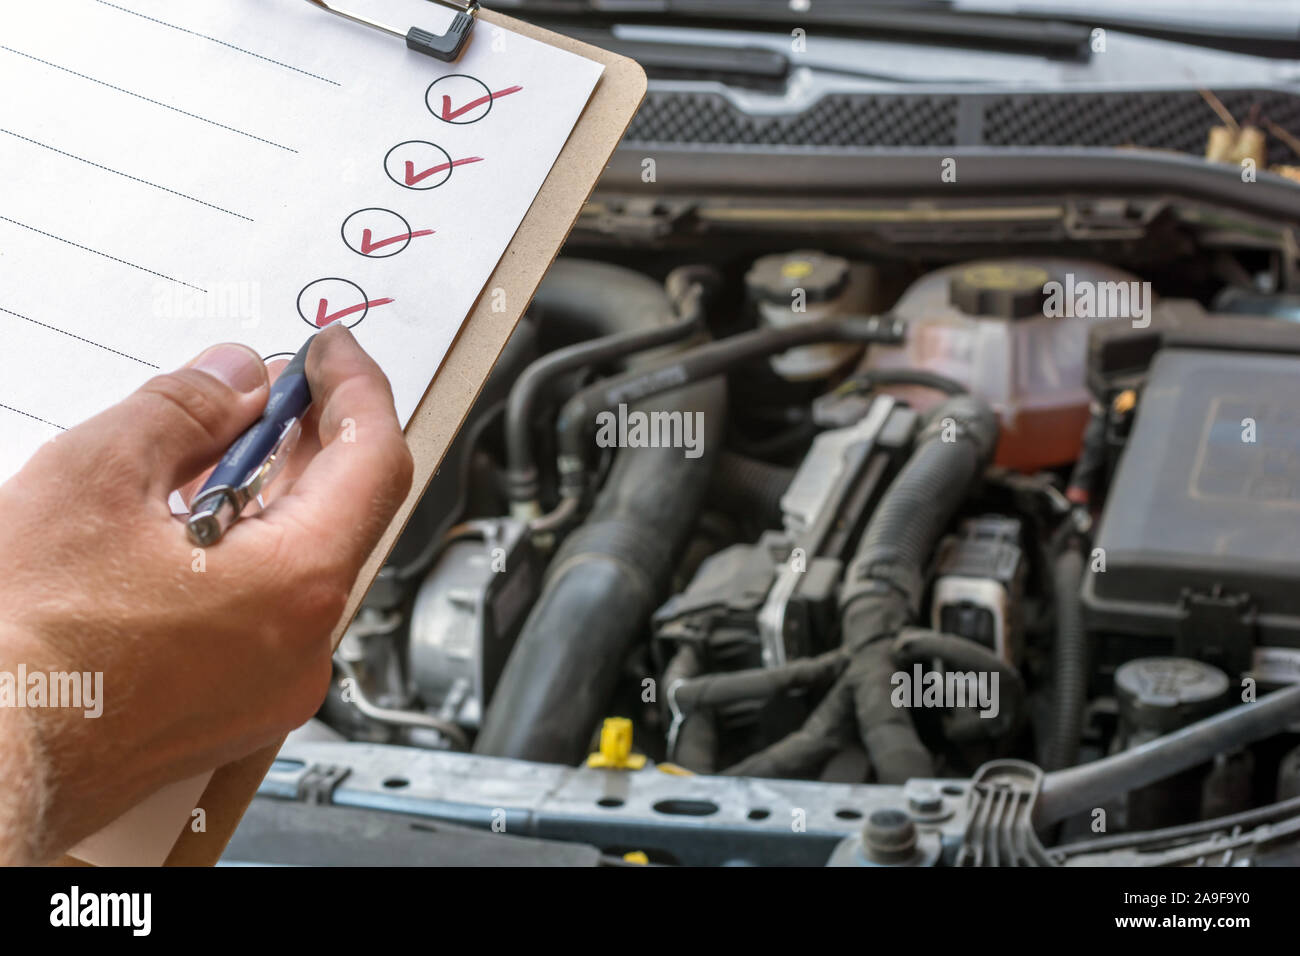 Checking the technical condition of a car with the help of a checked checklist Stock Photo